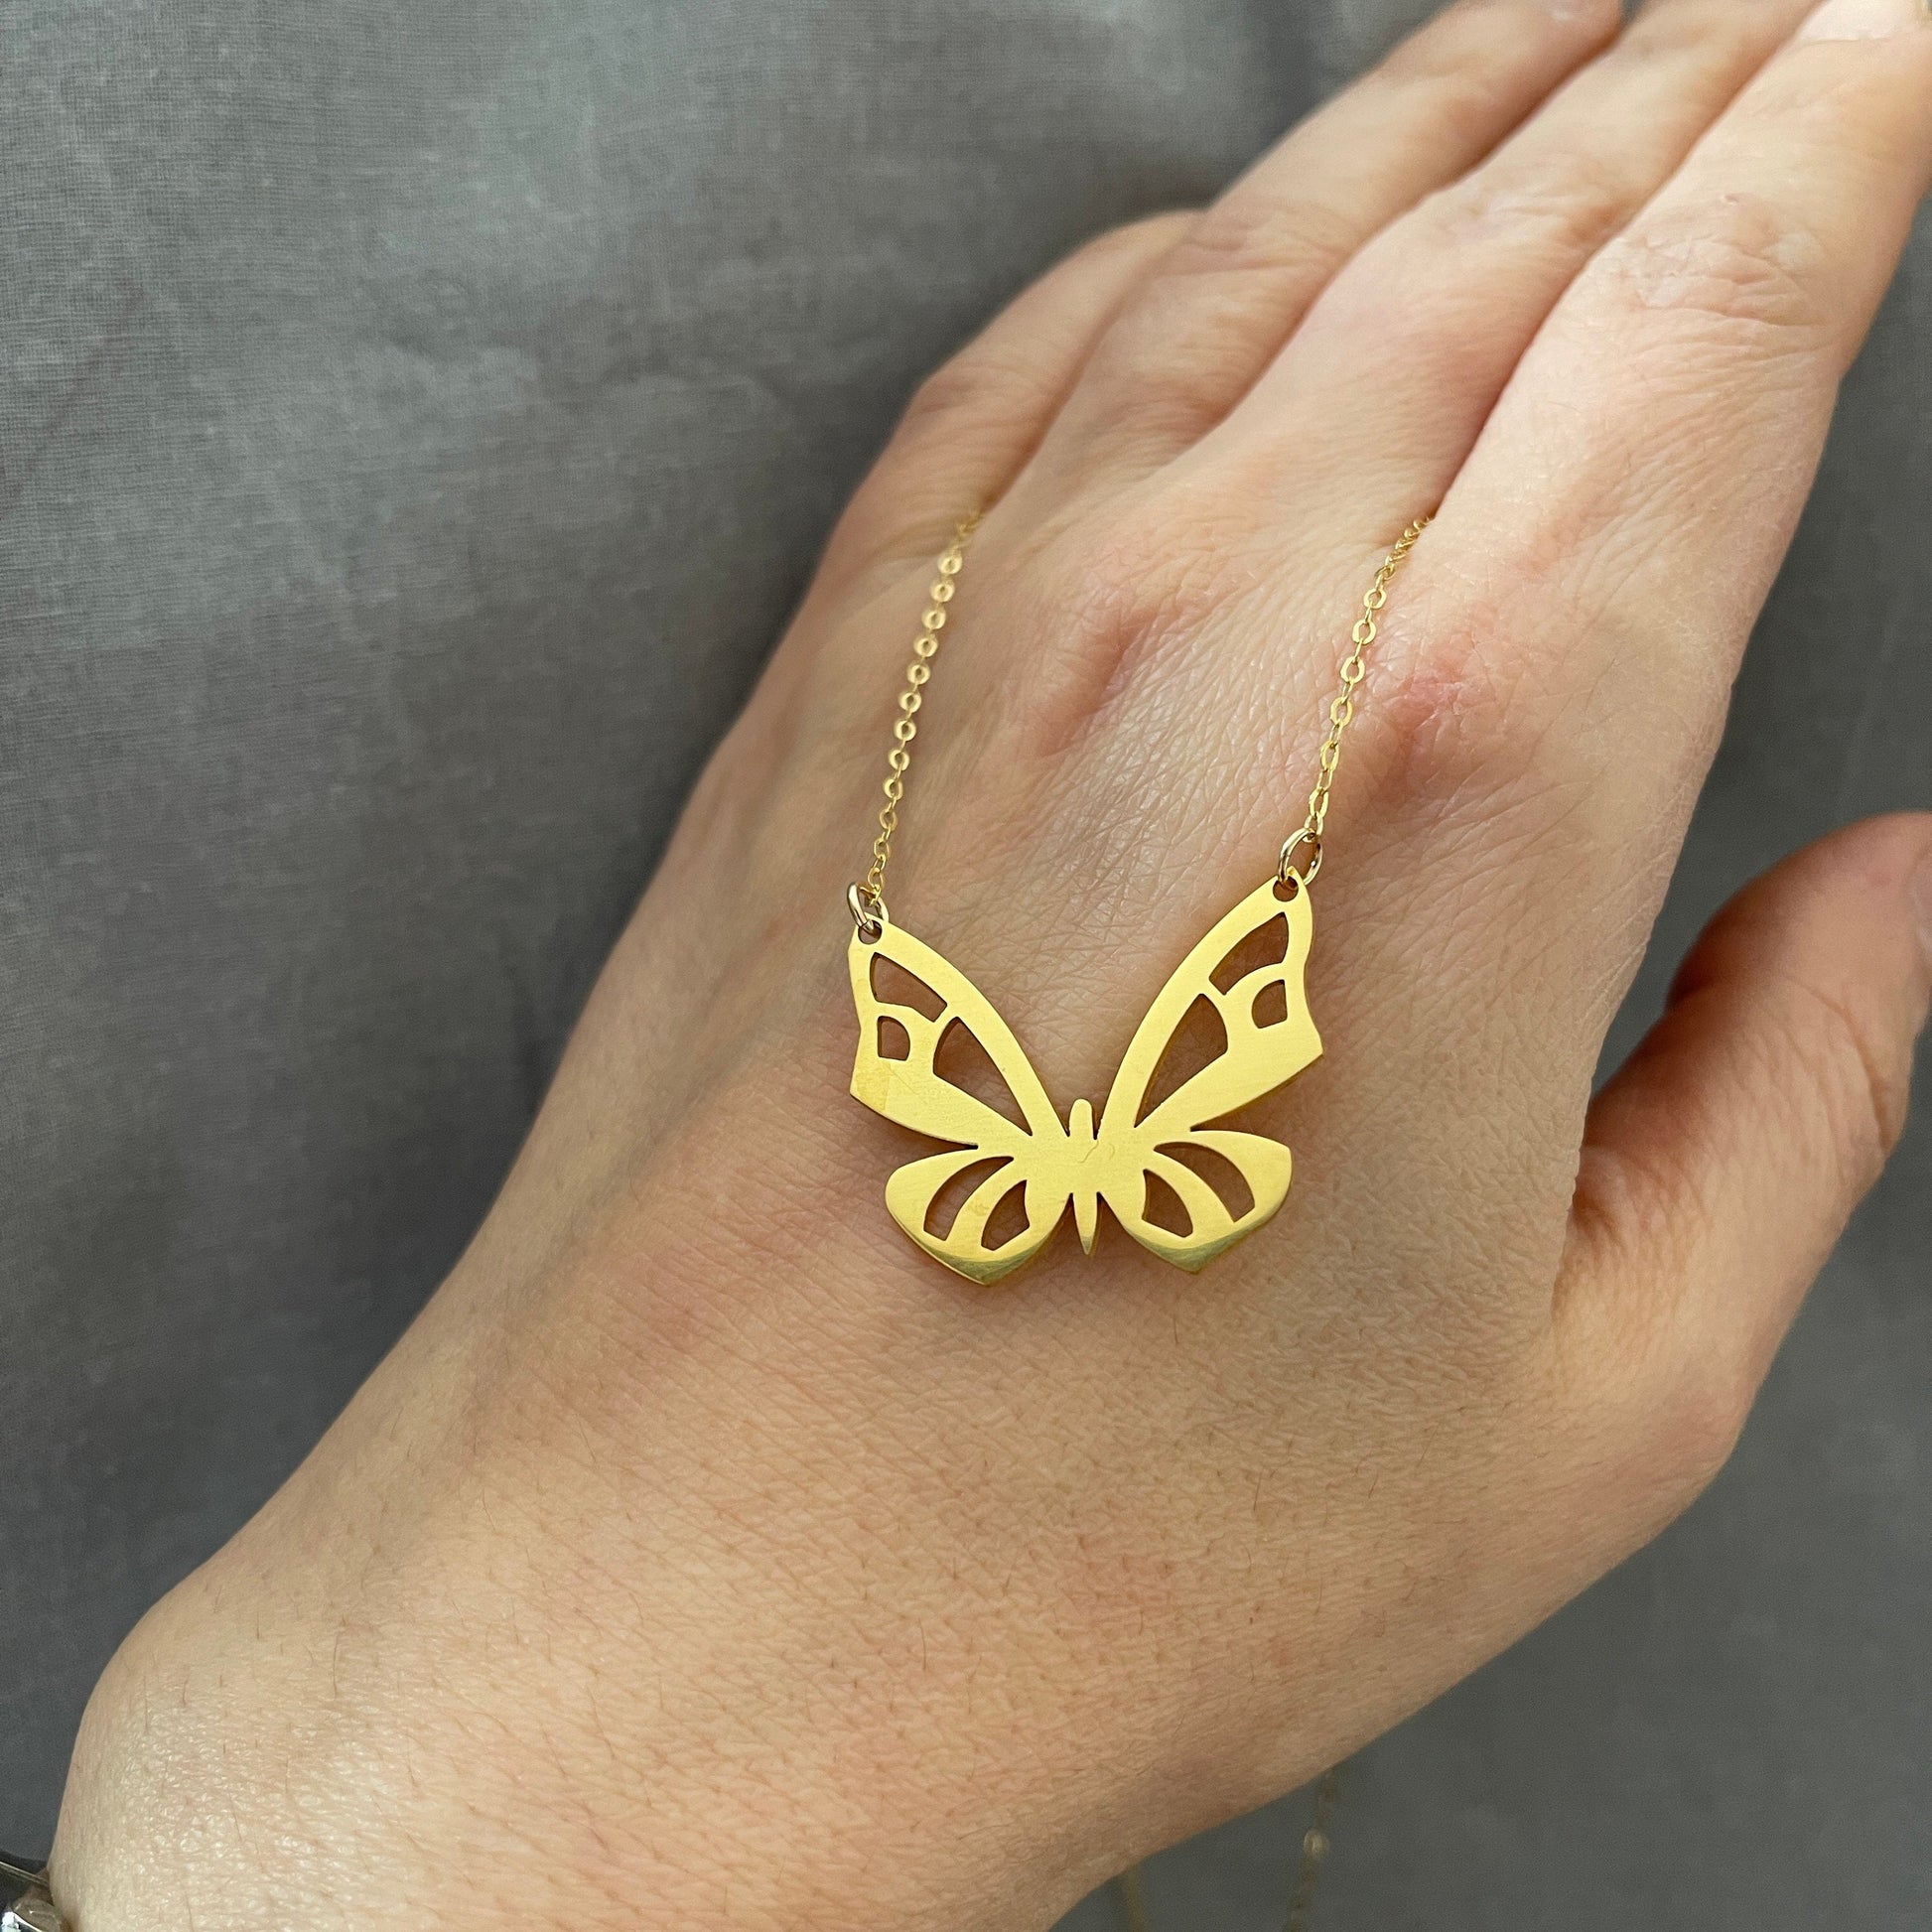 18k Gold Butterfly Necklaces, Sterling Silver Butterfly Necklace, Butterfly Pendant, Handmade Jewelry Gift For Her - sjewellery|sara jewellery shop toronto